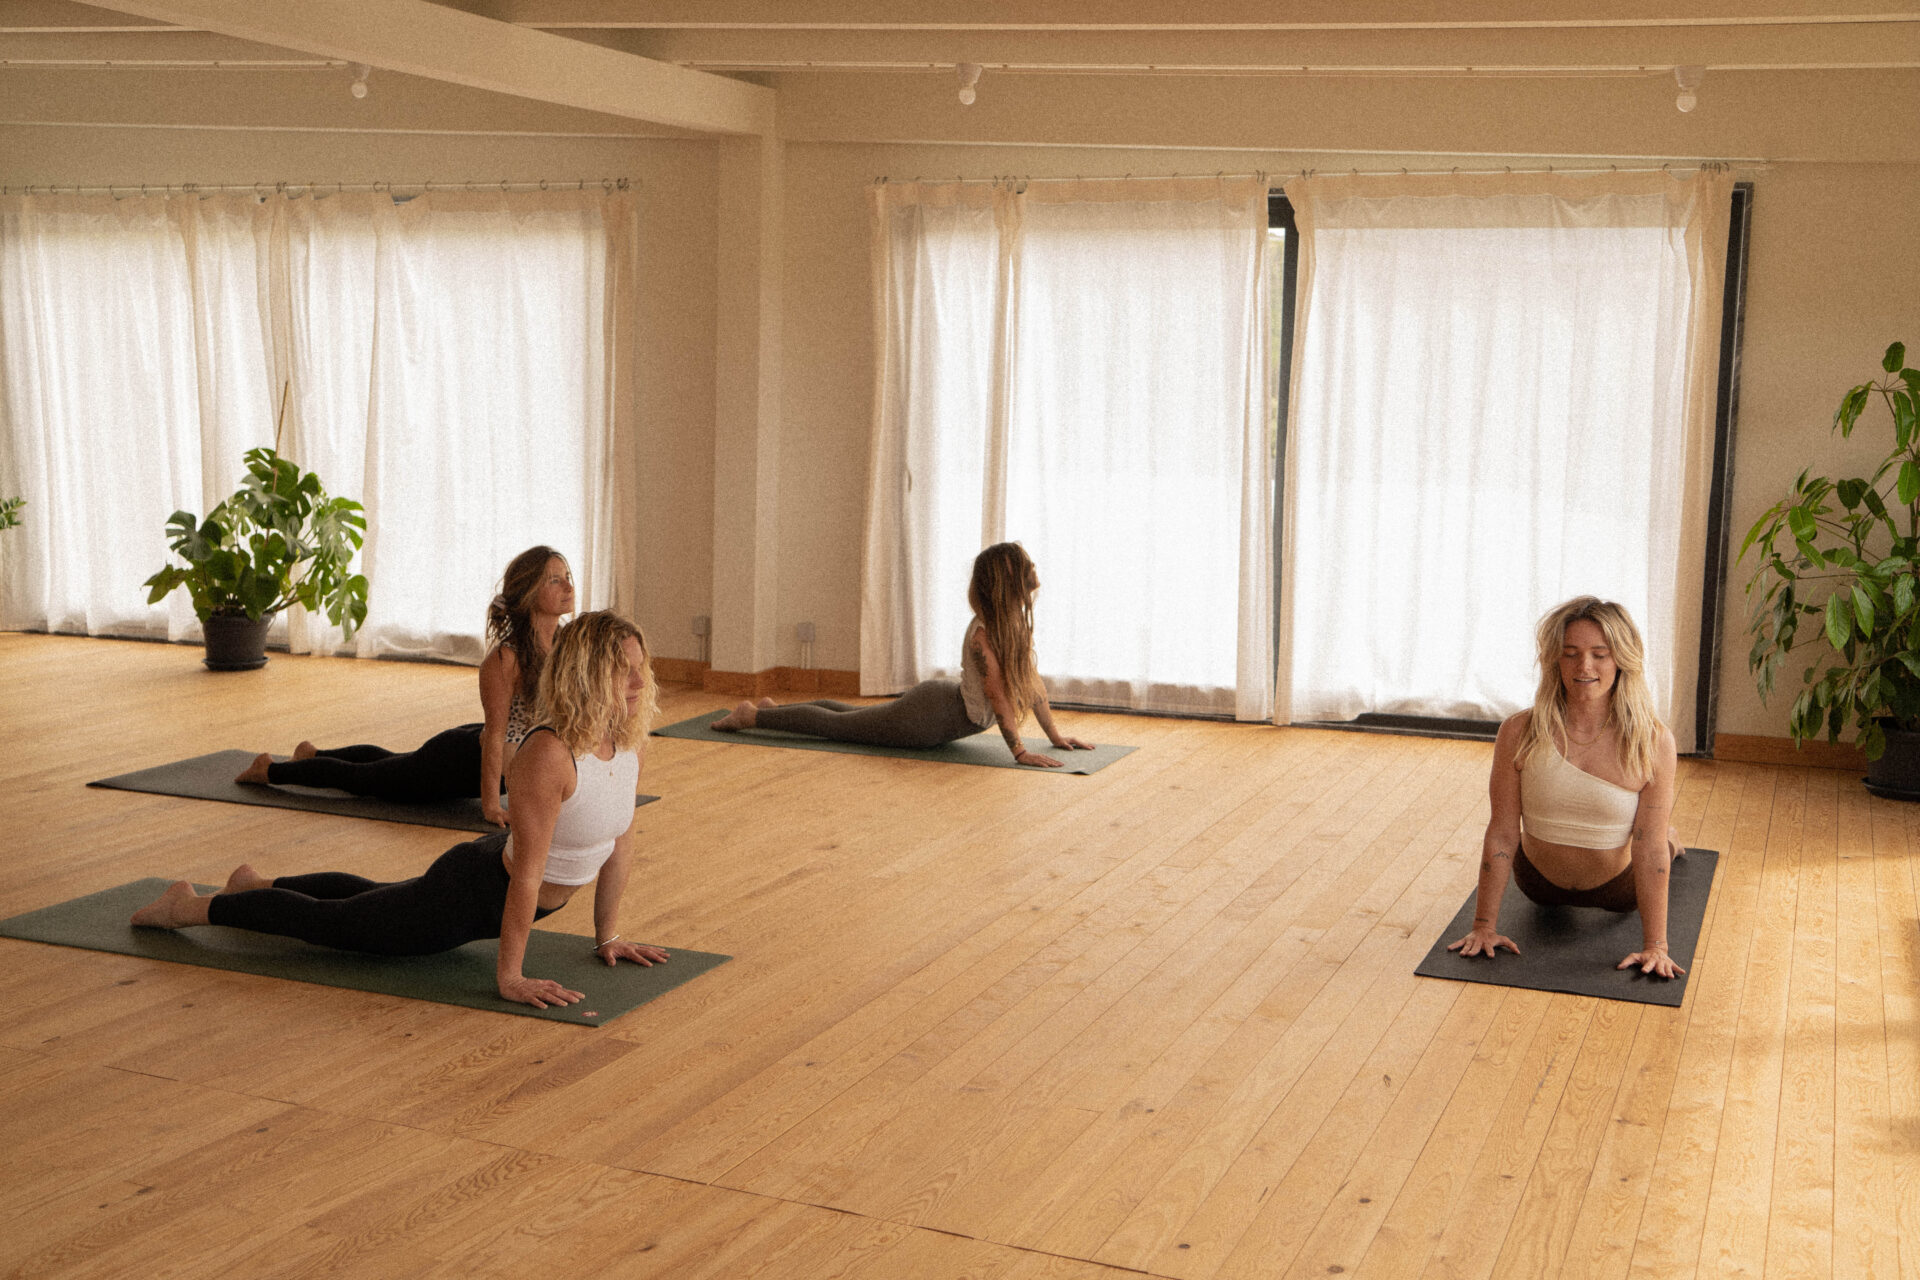 Yoga instructor is showing a specific yoga position and describig how important is to focus to keep the balance. Photo credits: Maximilian Salzer, Wurzelwerkstatt Retreat 2022 Ericeira